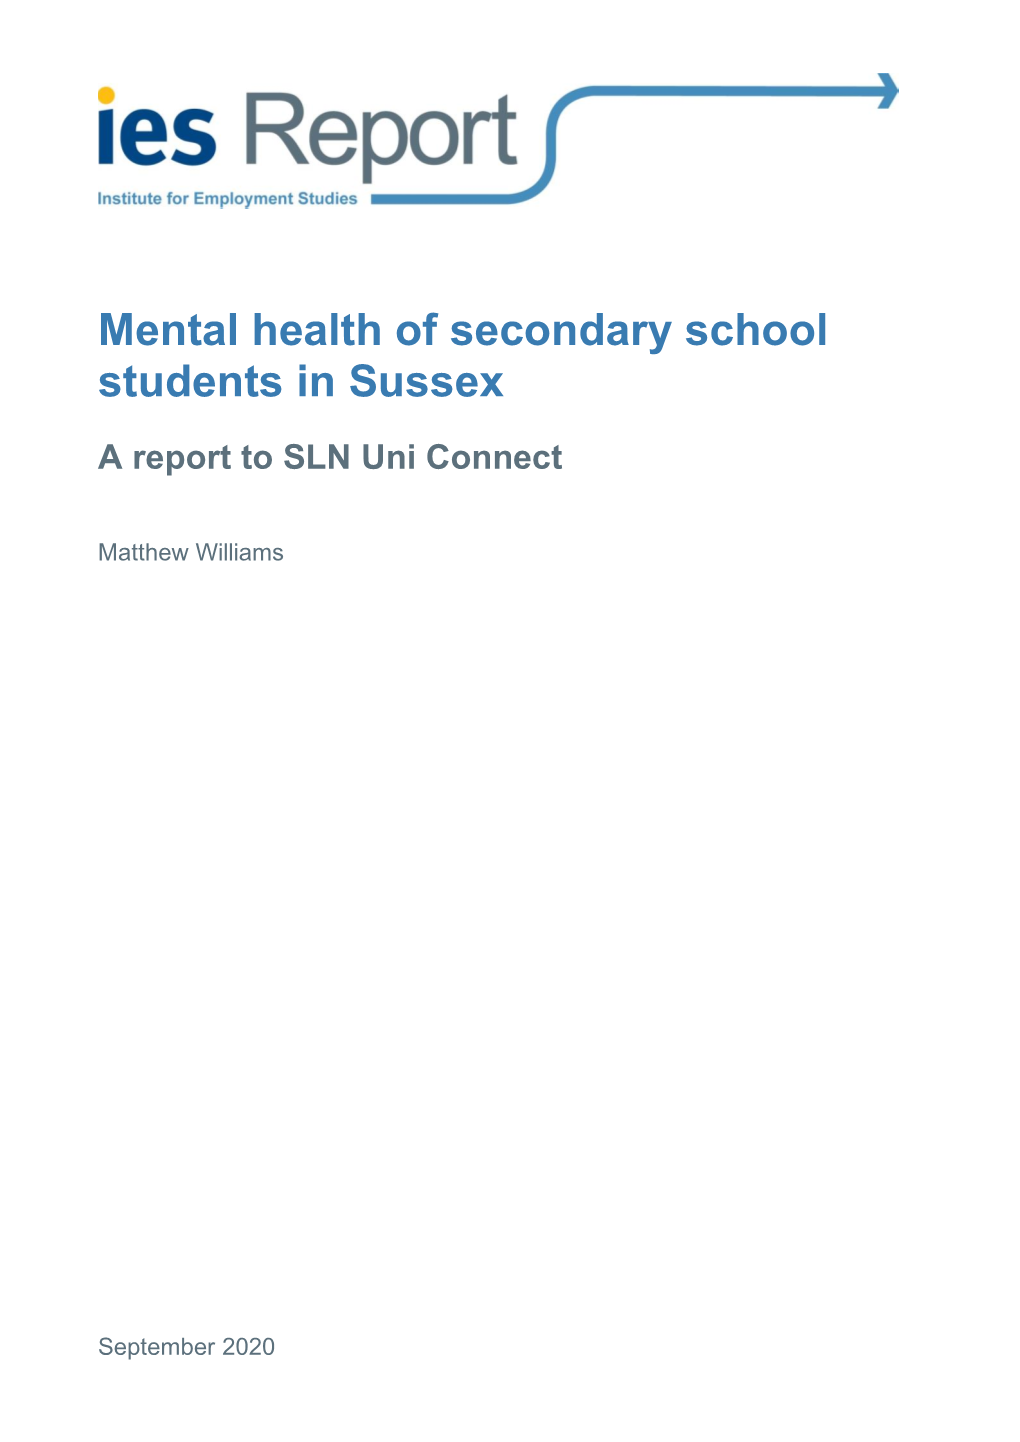 Mental Health of Secondary School Students in Sussex